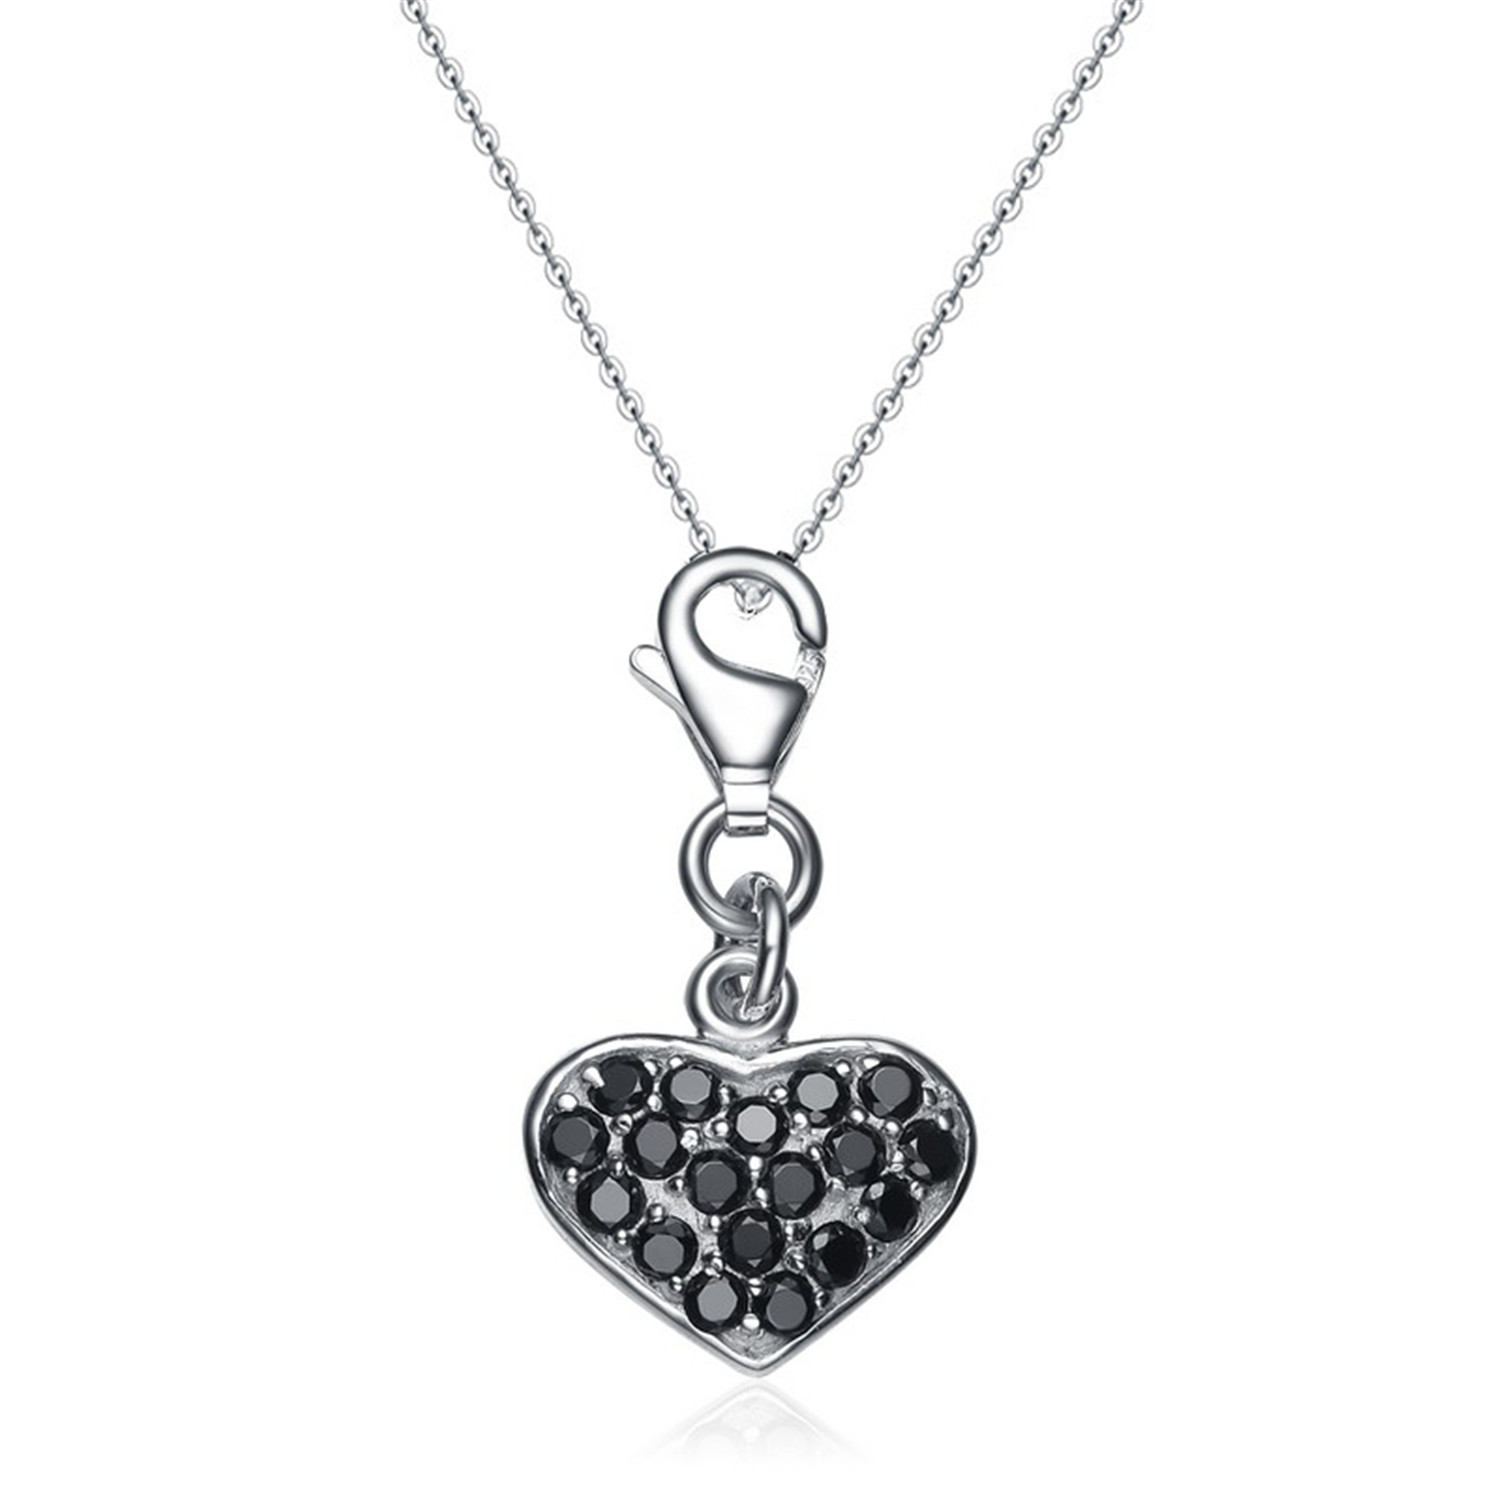 Jewelry Manufacturer Necklace Women 925 Sterling Silver Black Cubic Zirconia Heart Pendant Necklace(图4)